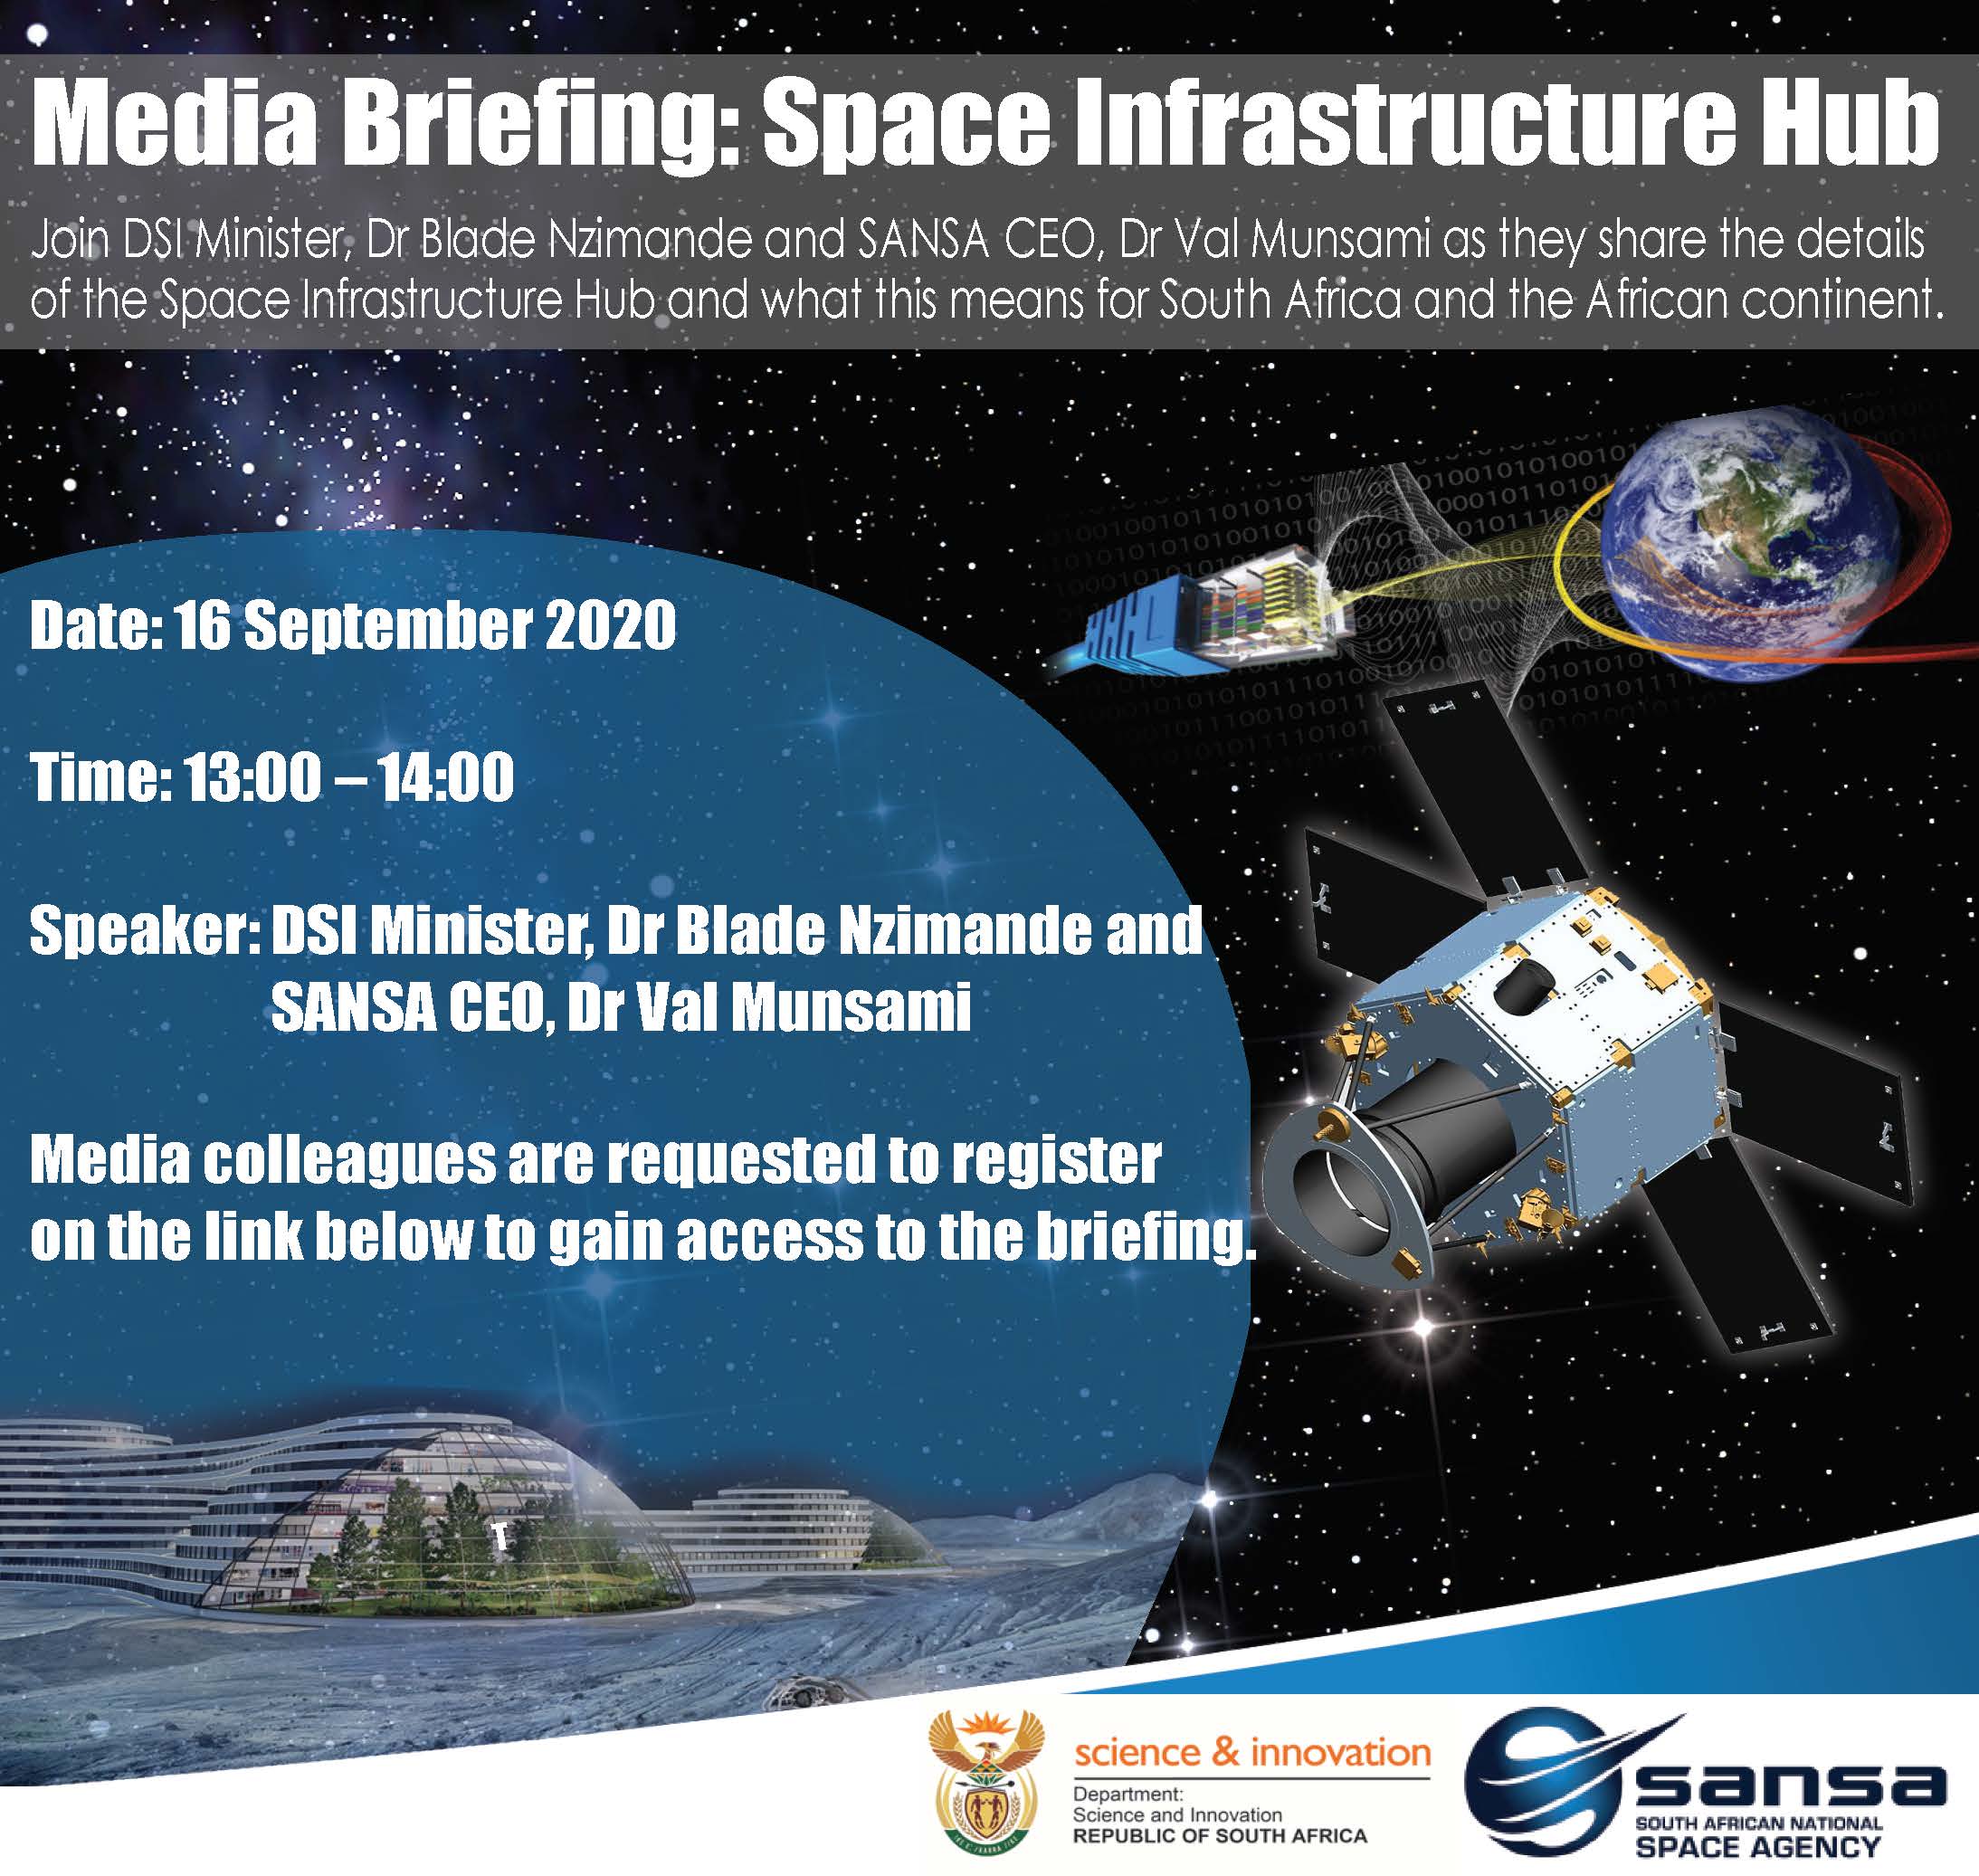 Media Briefing - Space Infrastructure Hub